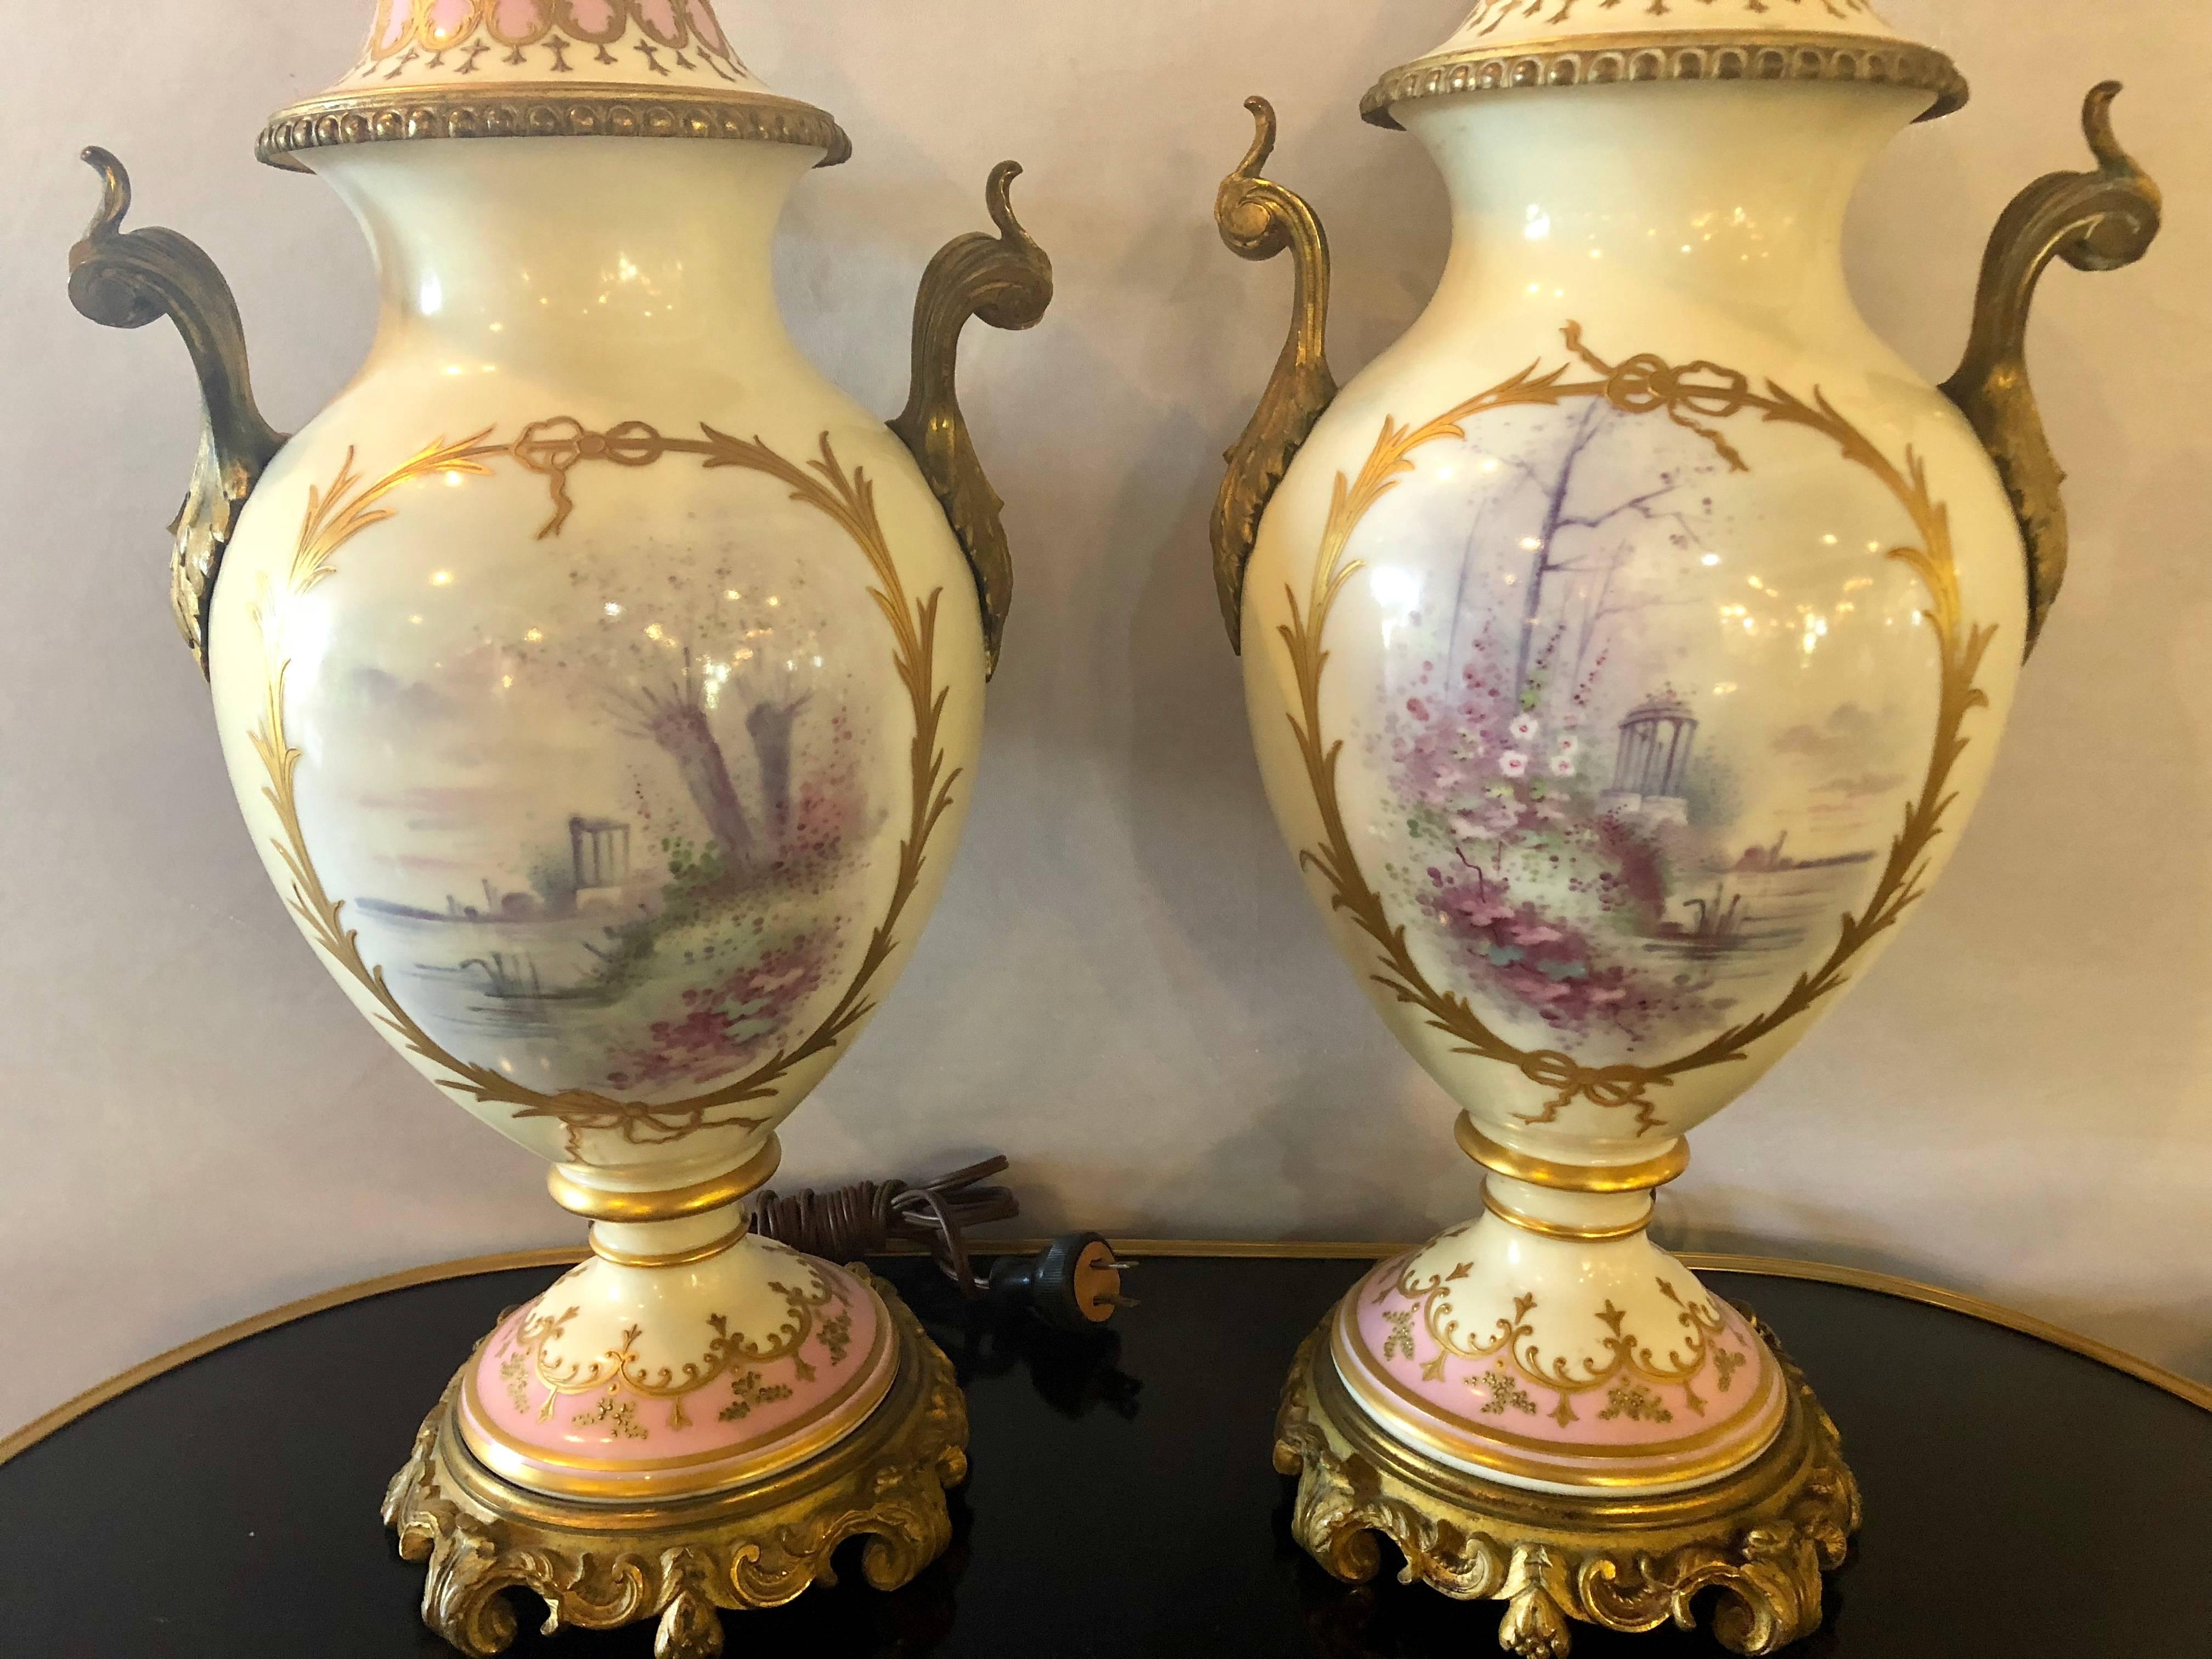 Pair of late 19th-early 20th century. bronze-mounted French Porcelain Lidded Urns, wired as table lamps, artist signed 'R. Pierens' painted and gilt decoration depicting women with cherubs and garden landscapes, stamped with Sevres blue mark of